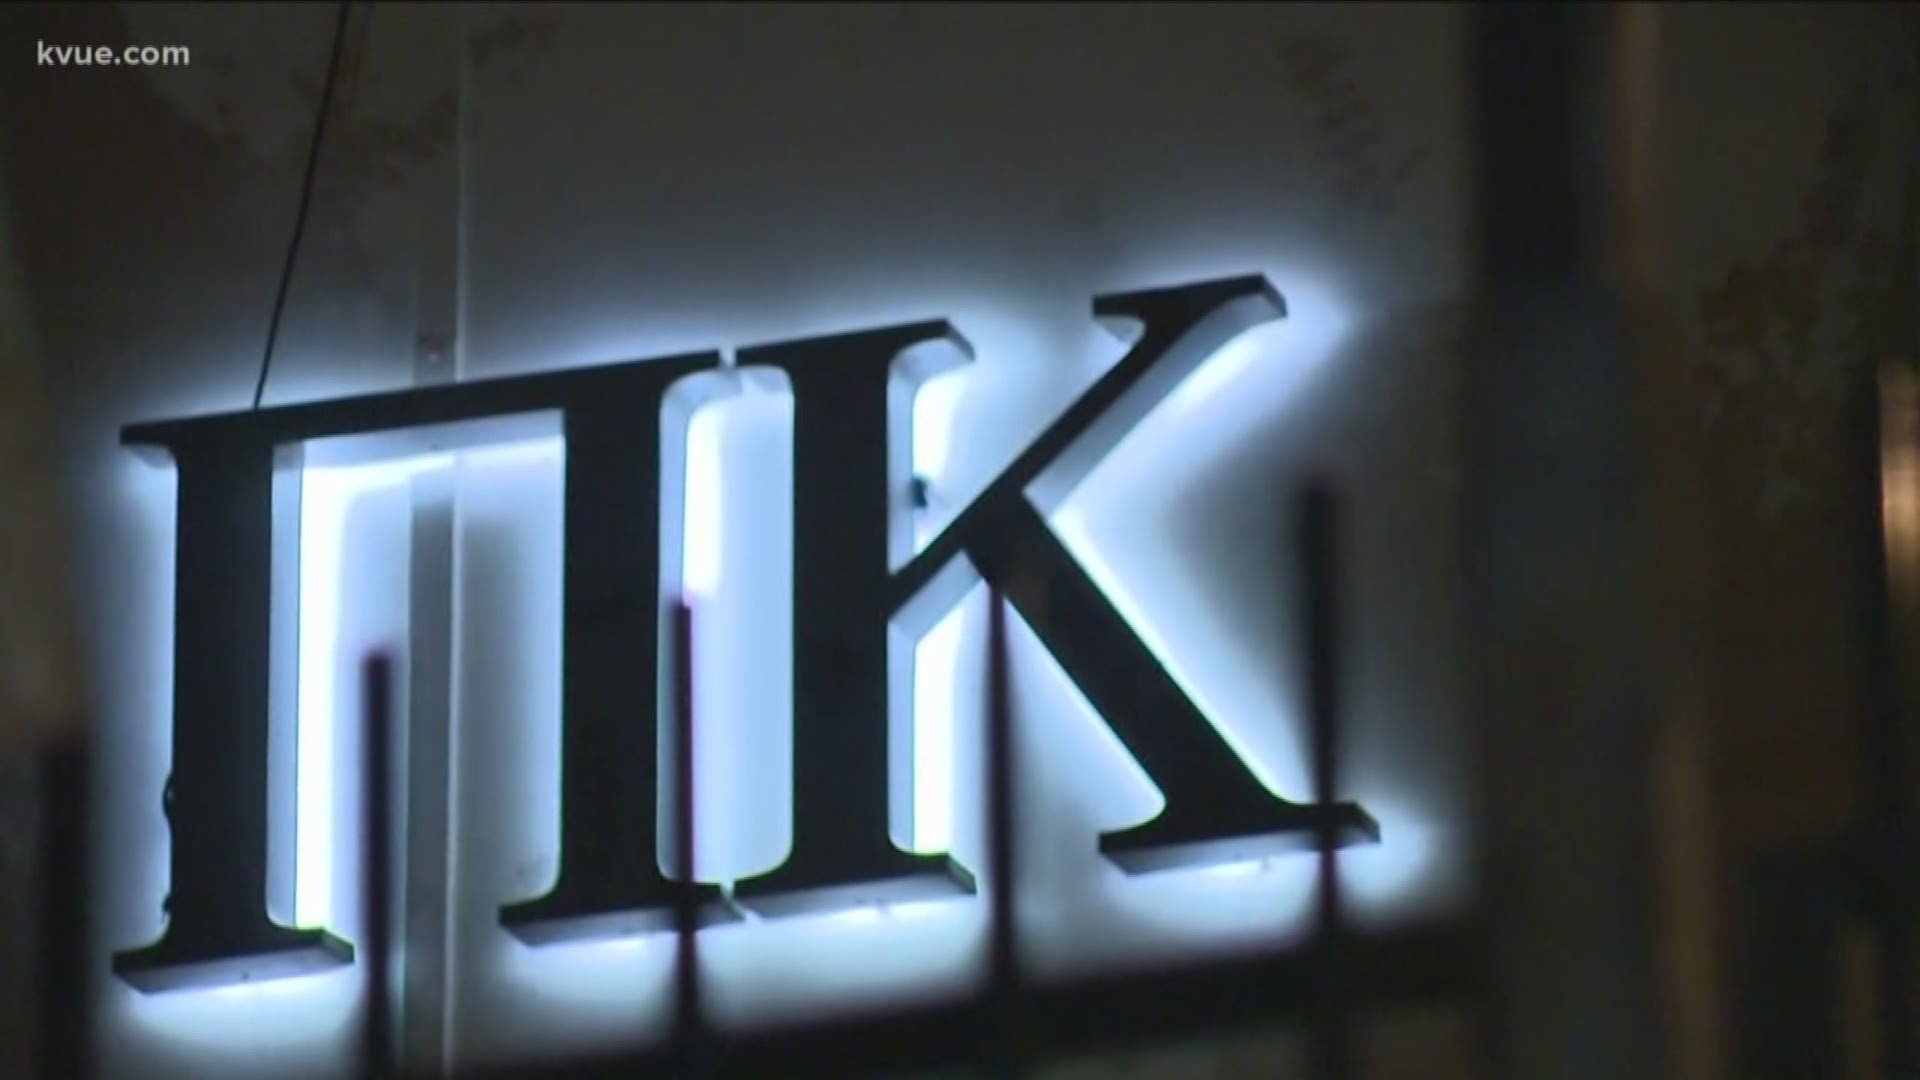 The University of Texas has banned Pi Kappa Phi over hazing allegations, according to the Dallas Morning News.